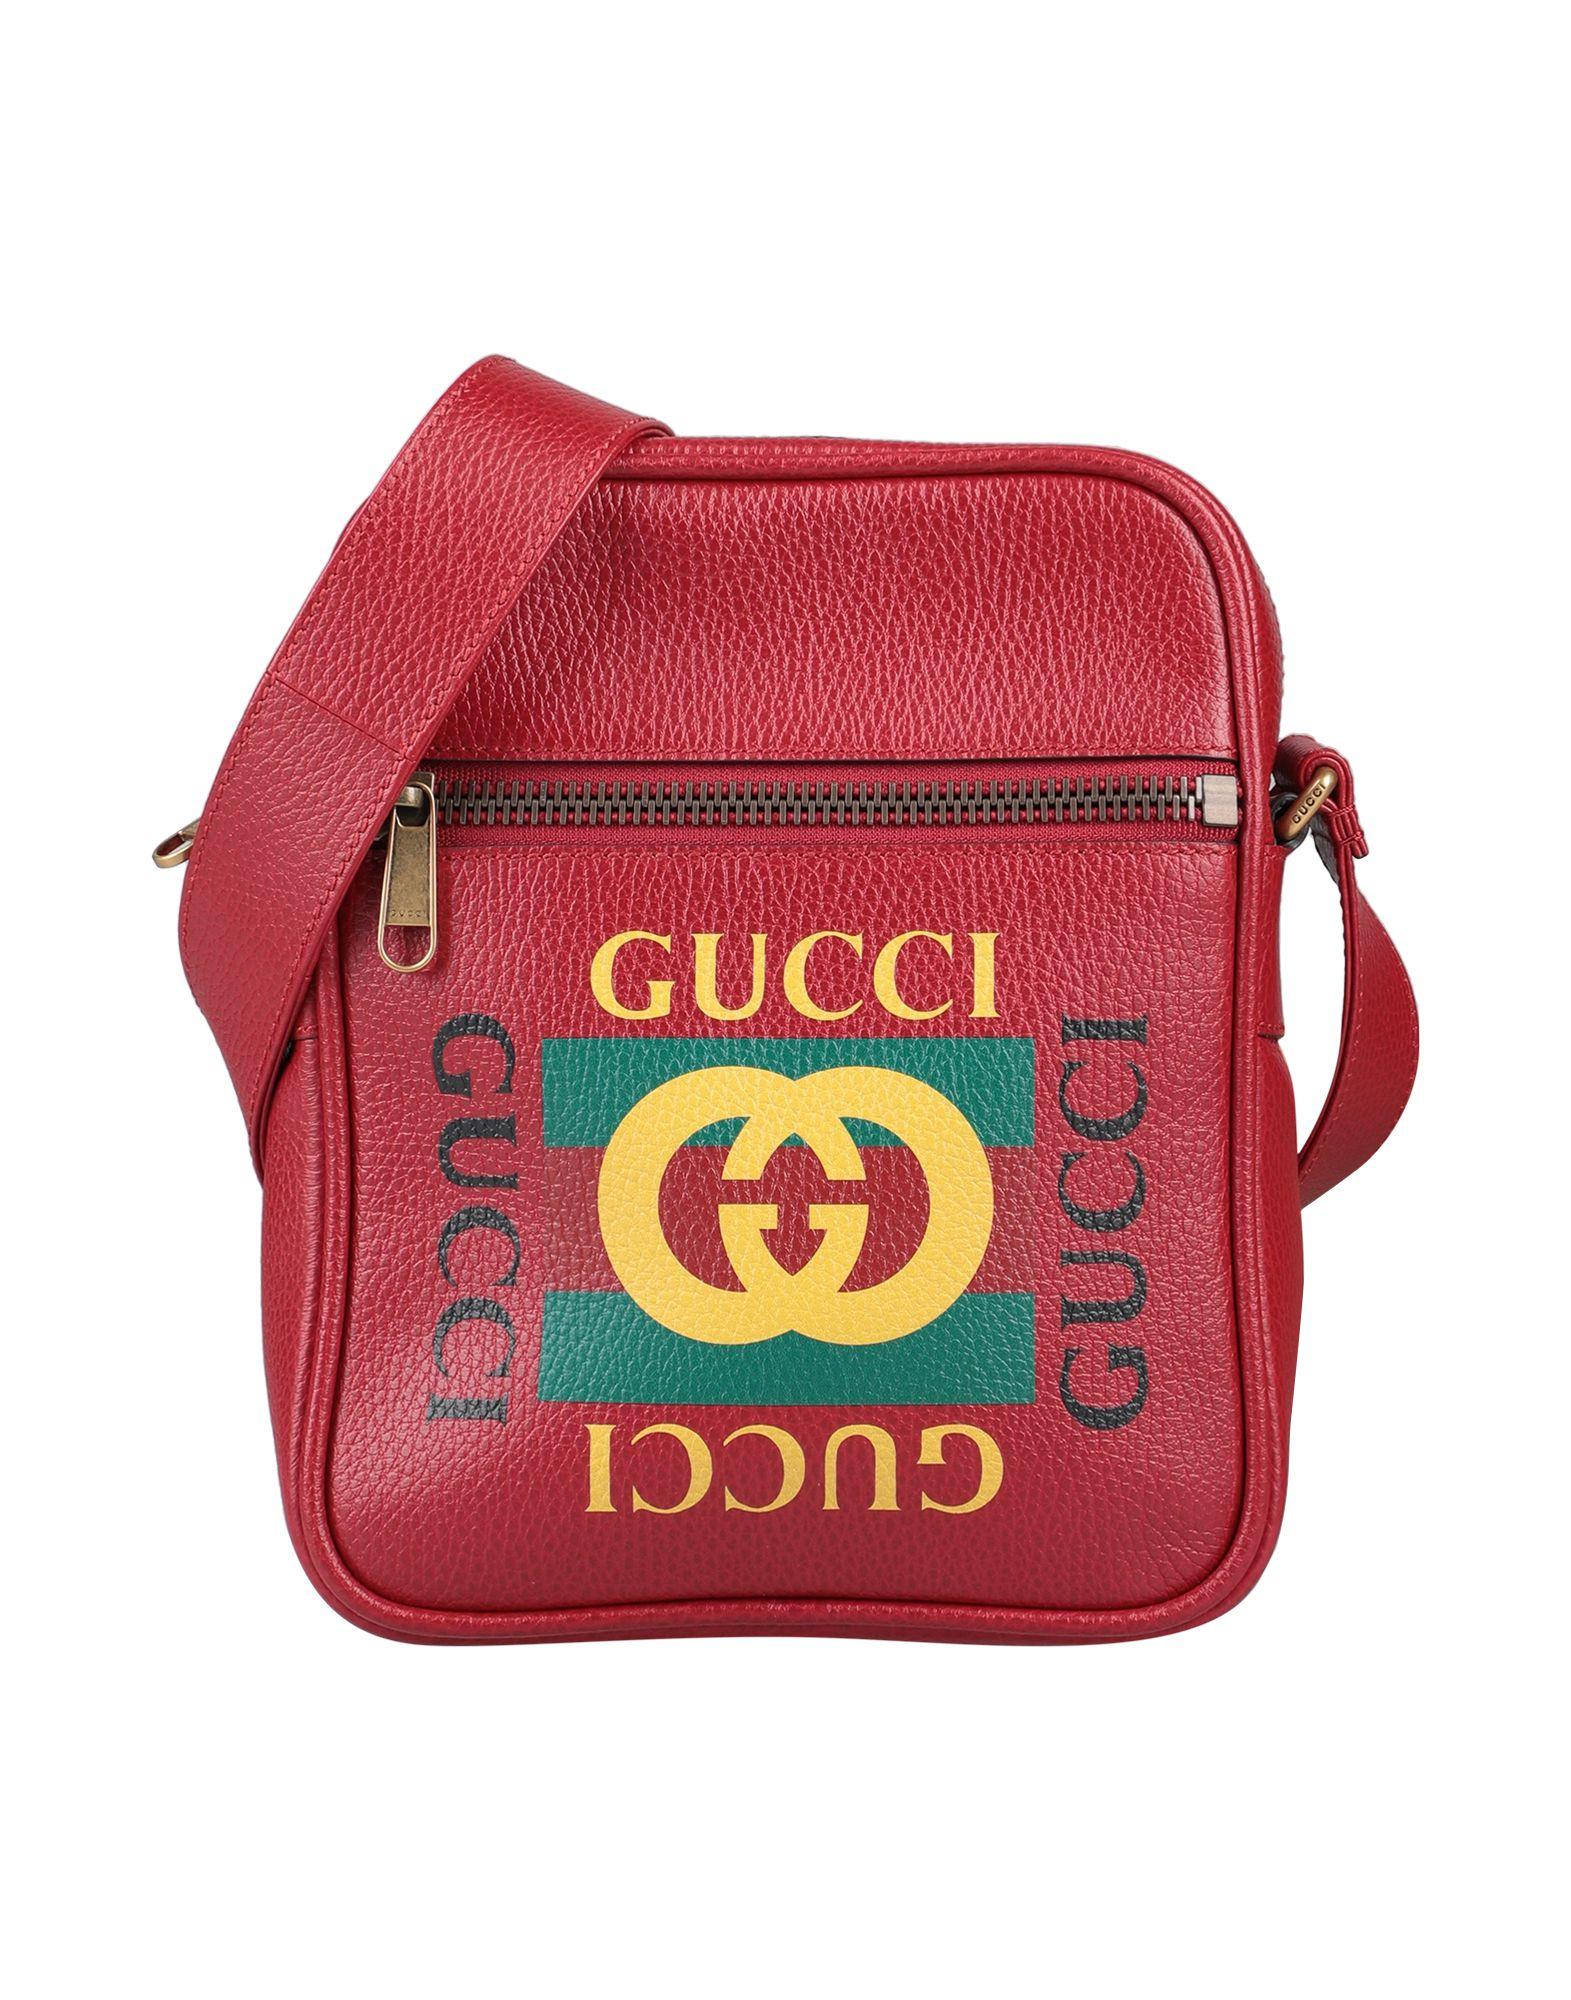 Gucci Leather Print Messenger Bag in Red for Men - Save 47% - Lyst